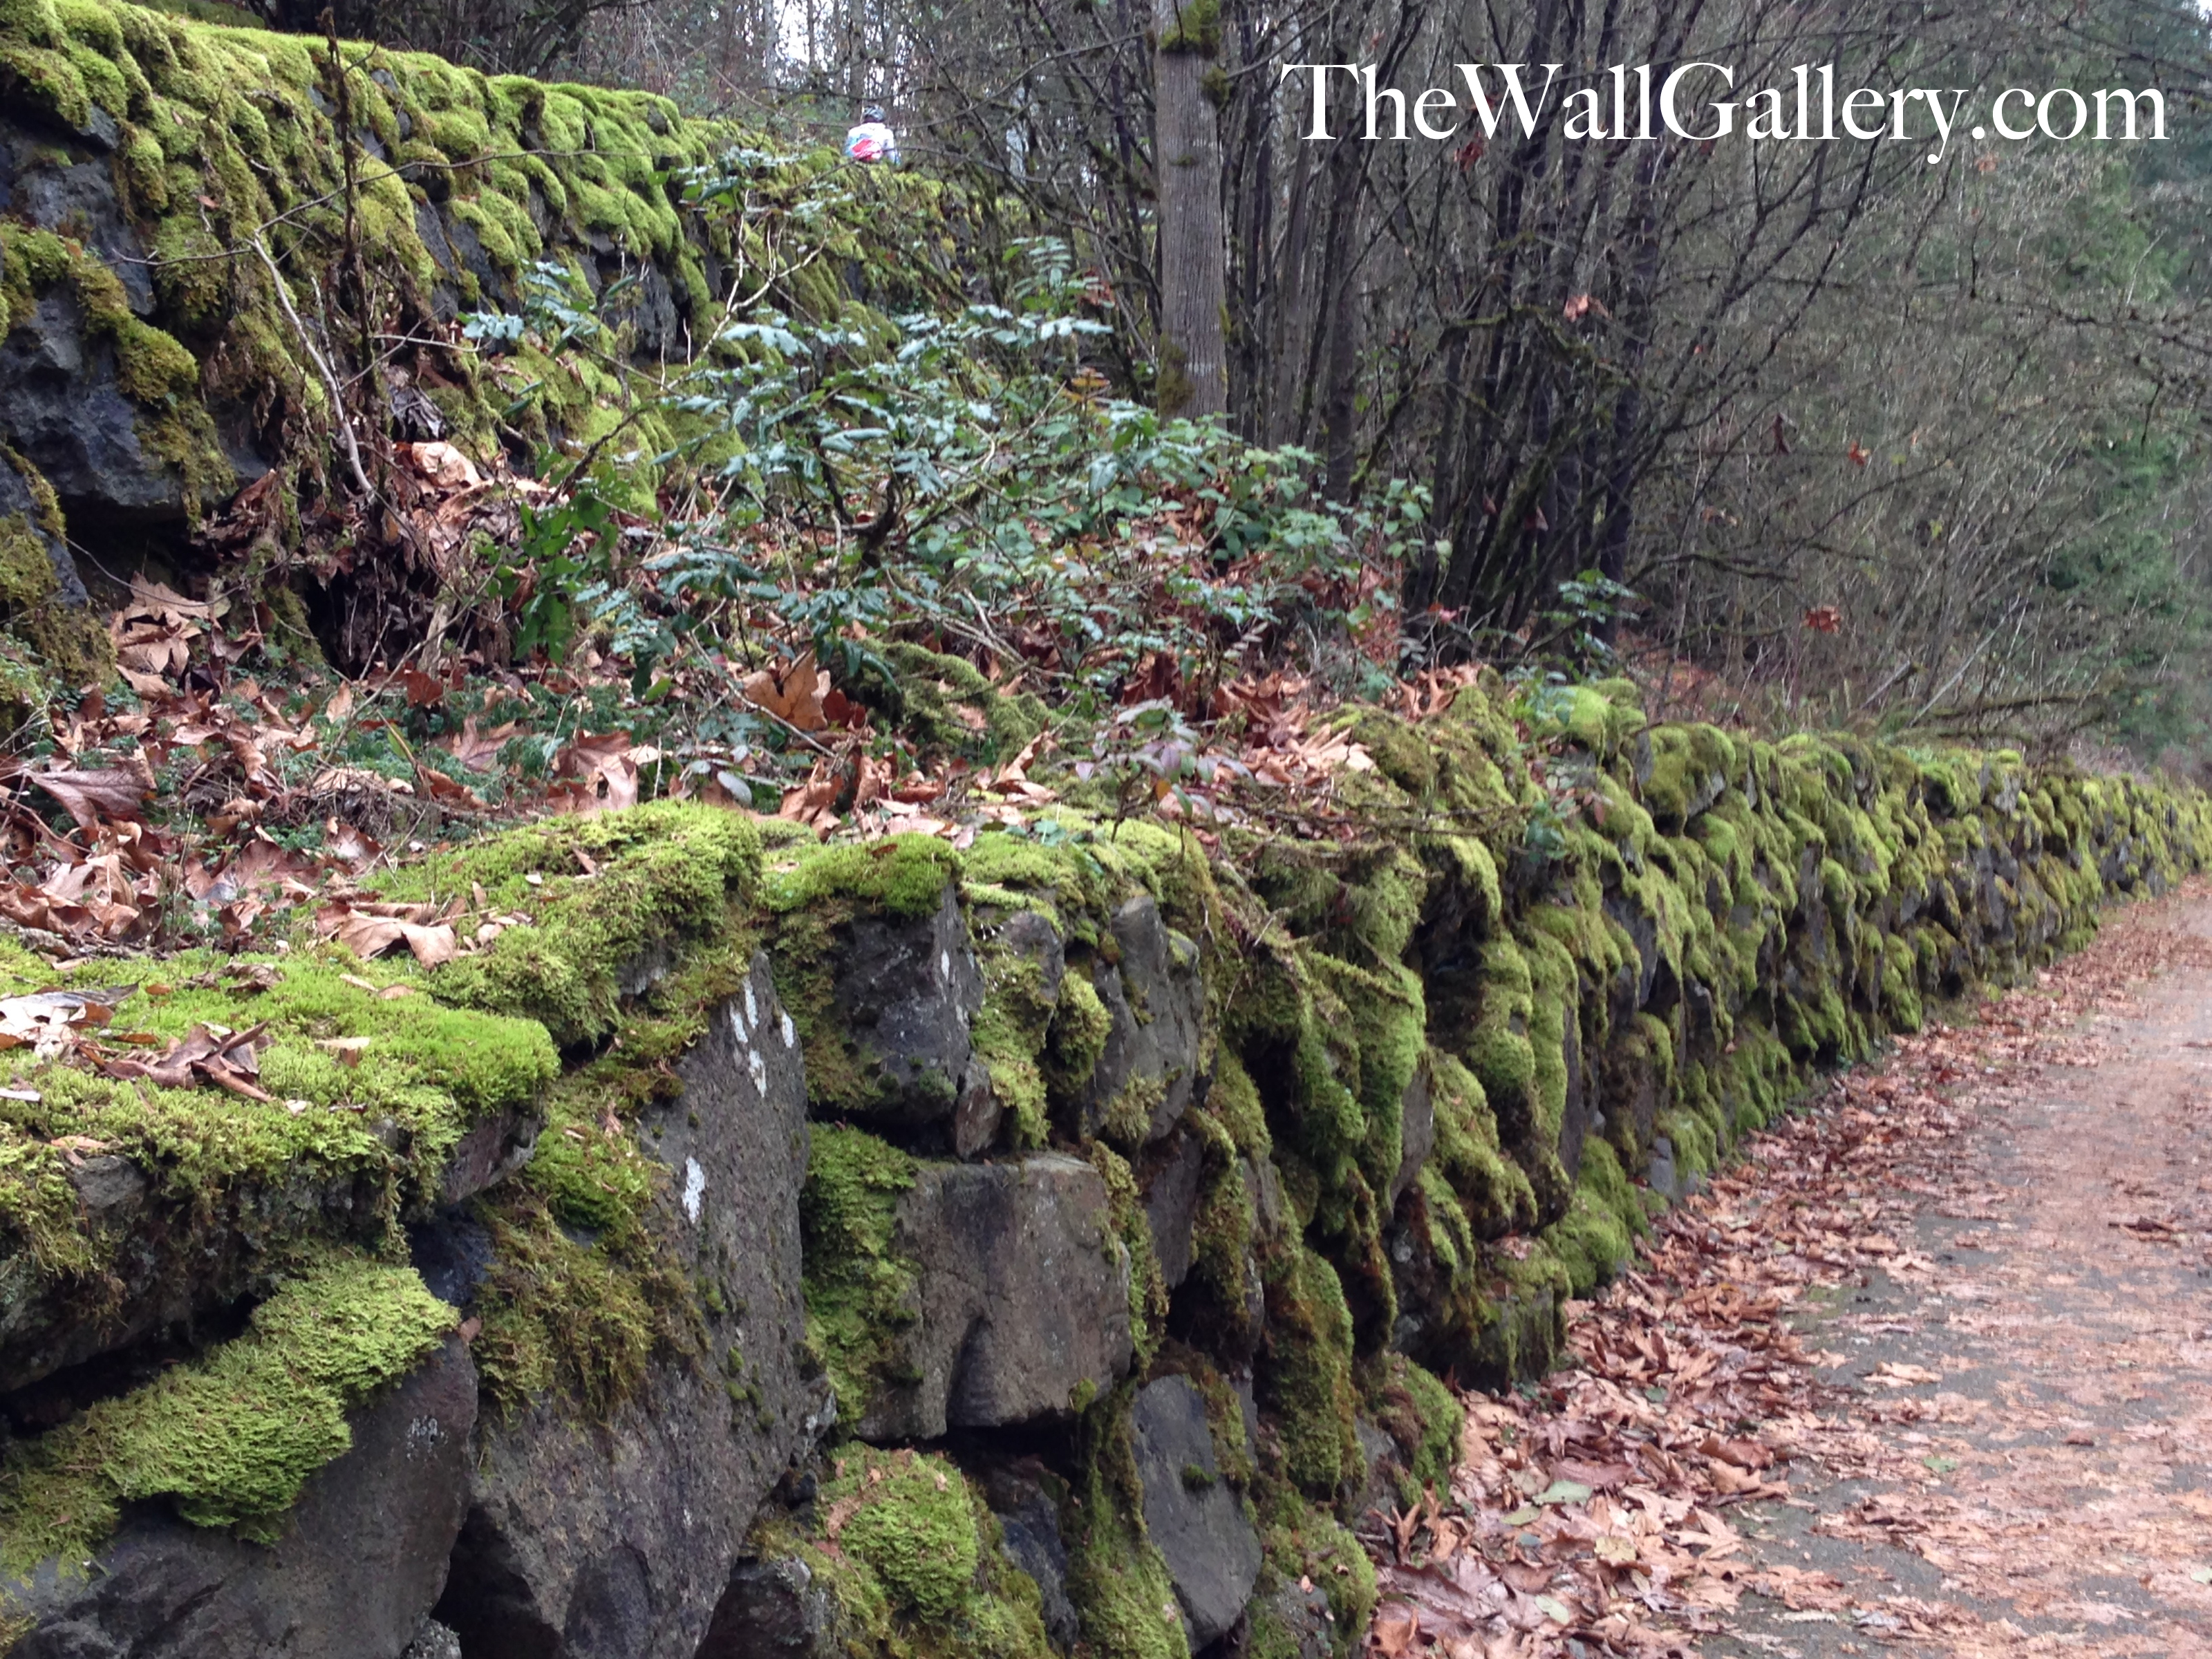 Close up of the Moss Rock Wall